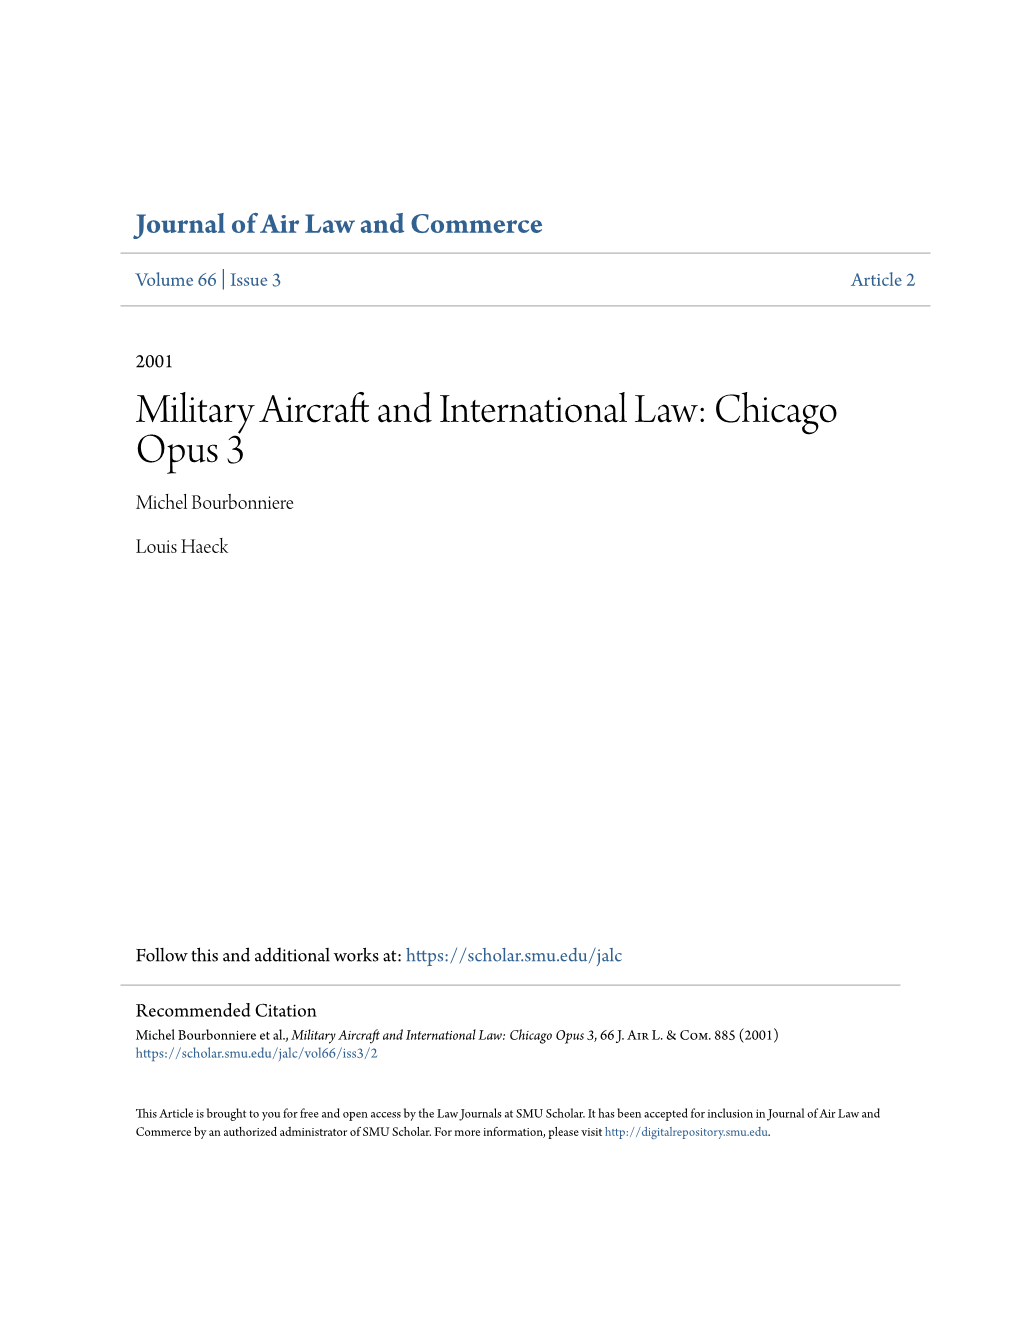 Military Aircraft and International Law: Chicago Opus 3'